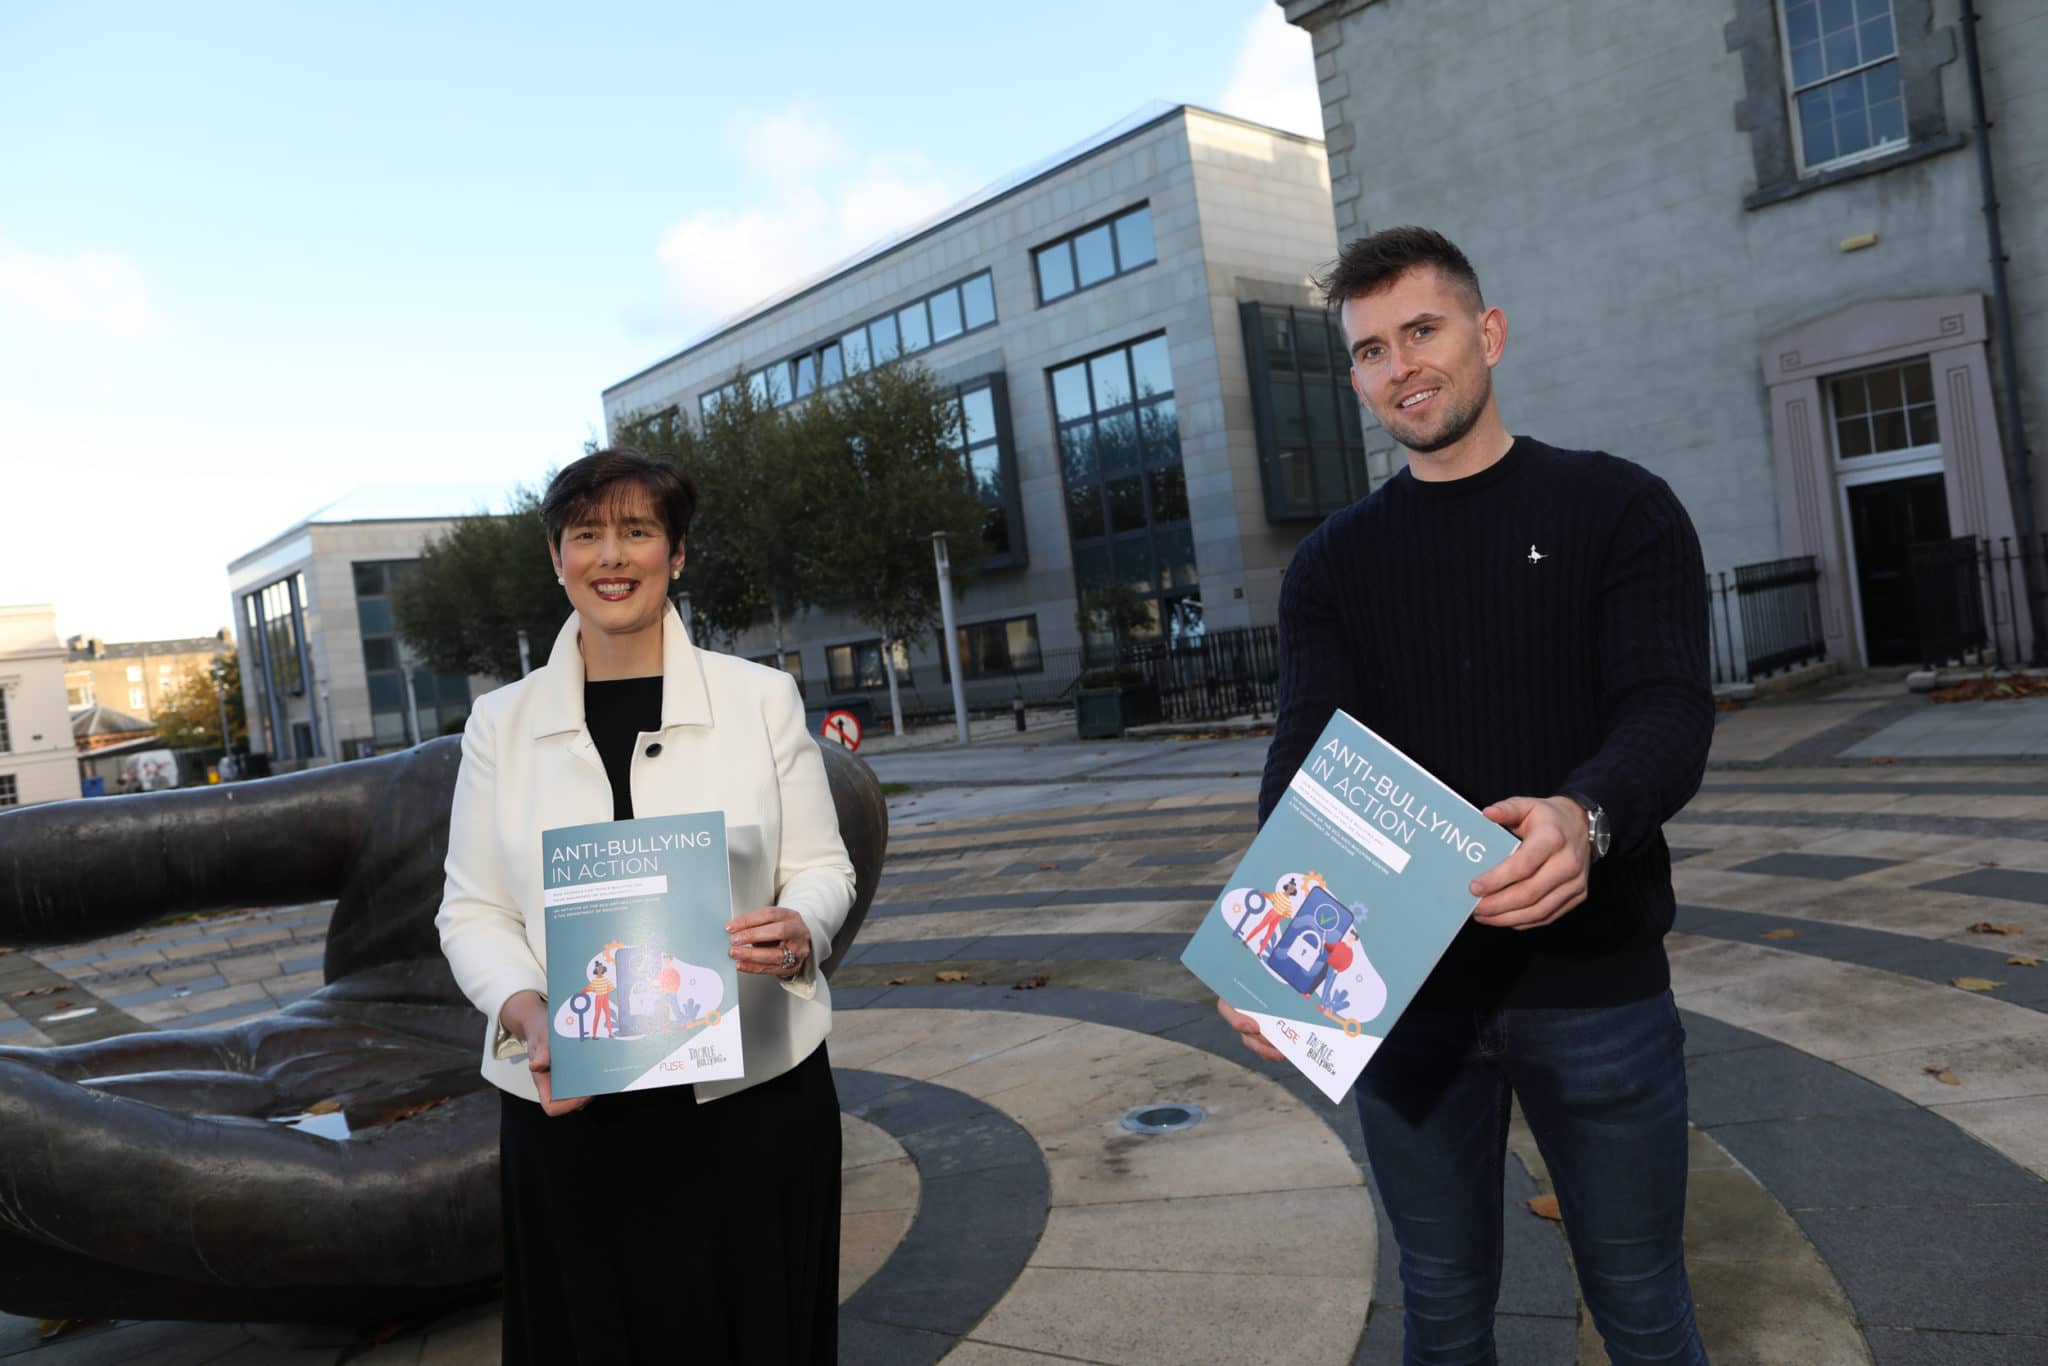 This is a photo of Norma Foley TD and Colm Canning. They holding booklets titled "Anti-Bullying in Action" towards the camera.